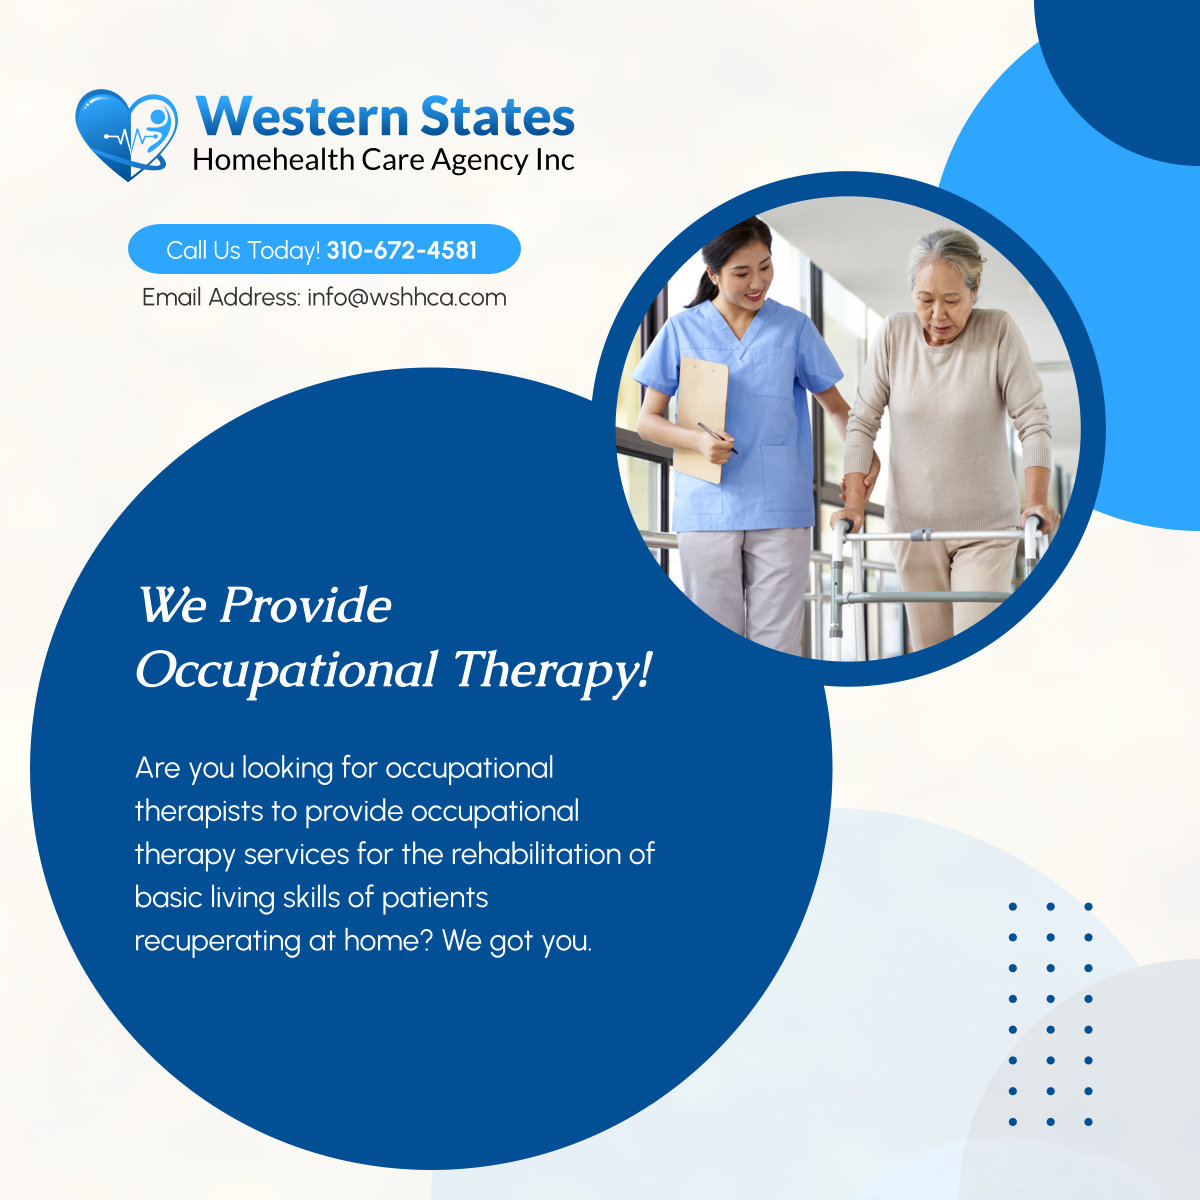 Occupational therapists will focus on assessing and evaluating health and basic skills, planning and implementing therapeutic programs, therapeutic programs, and sensory function restoration, etc.

#LosAngelesCA #OccupationalTherapy #HomeHealthCare #Rehabilitation #TherapyProgram